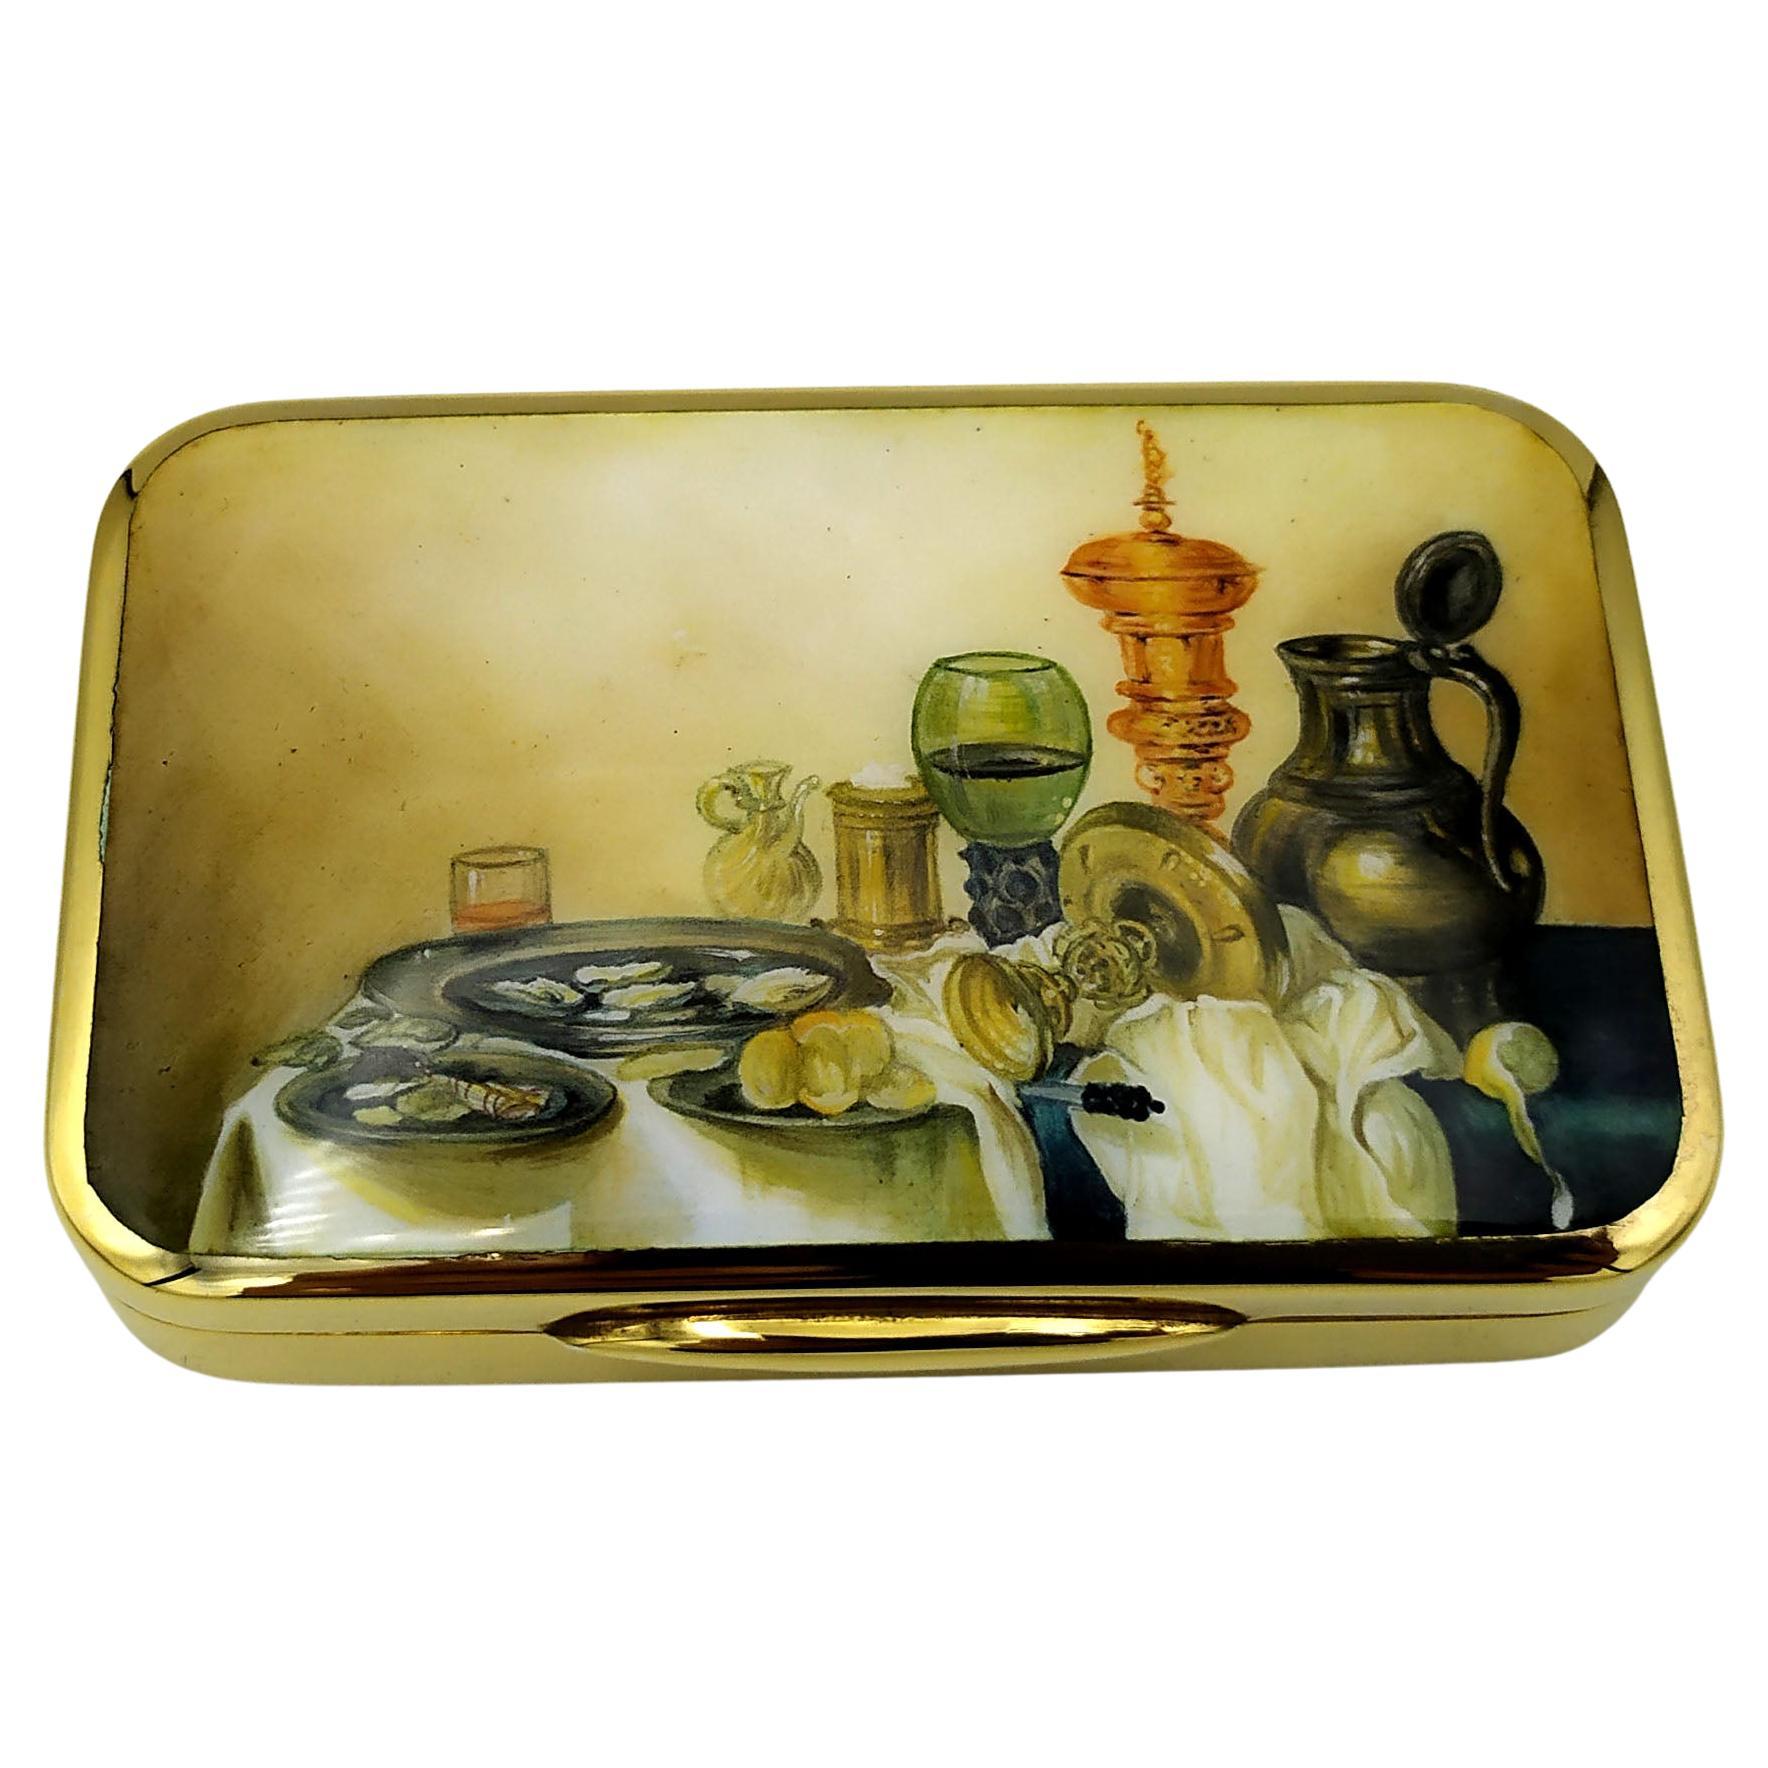 Cigarette Case Fired Enamel with Still Life Miniature Sterling Silver Salimbeni For Sale